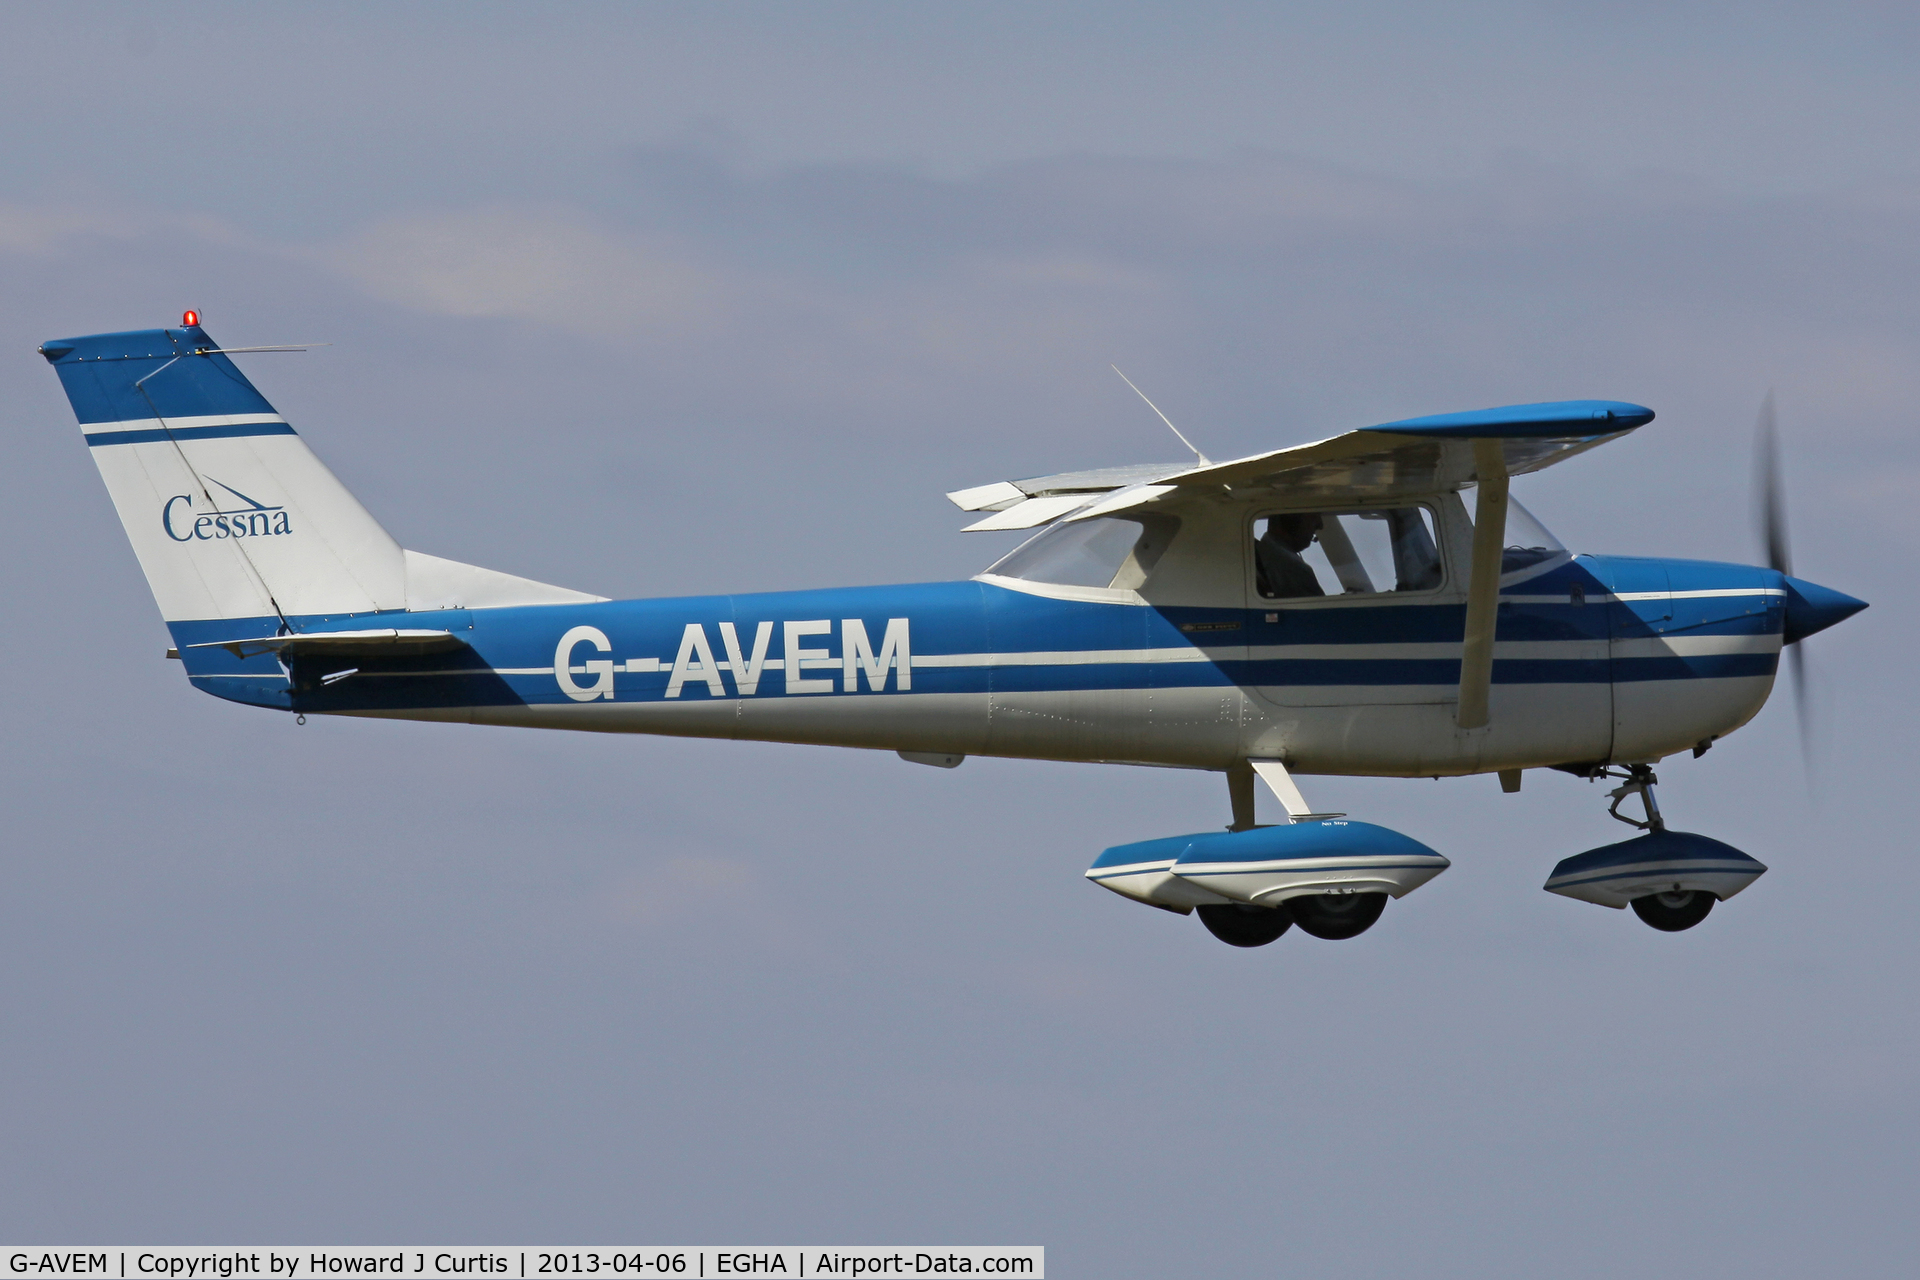 G-AVEM, 1966 Reims F150G C/N 0198, Privately owned. Caught on departure, a resident here.